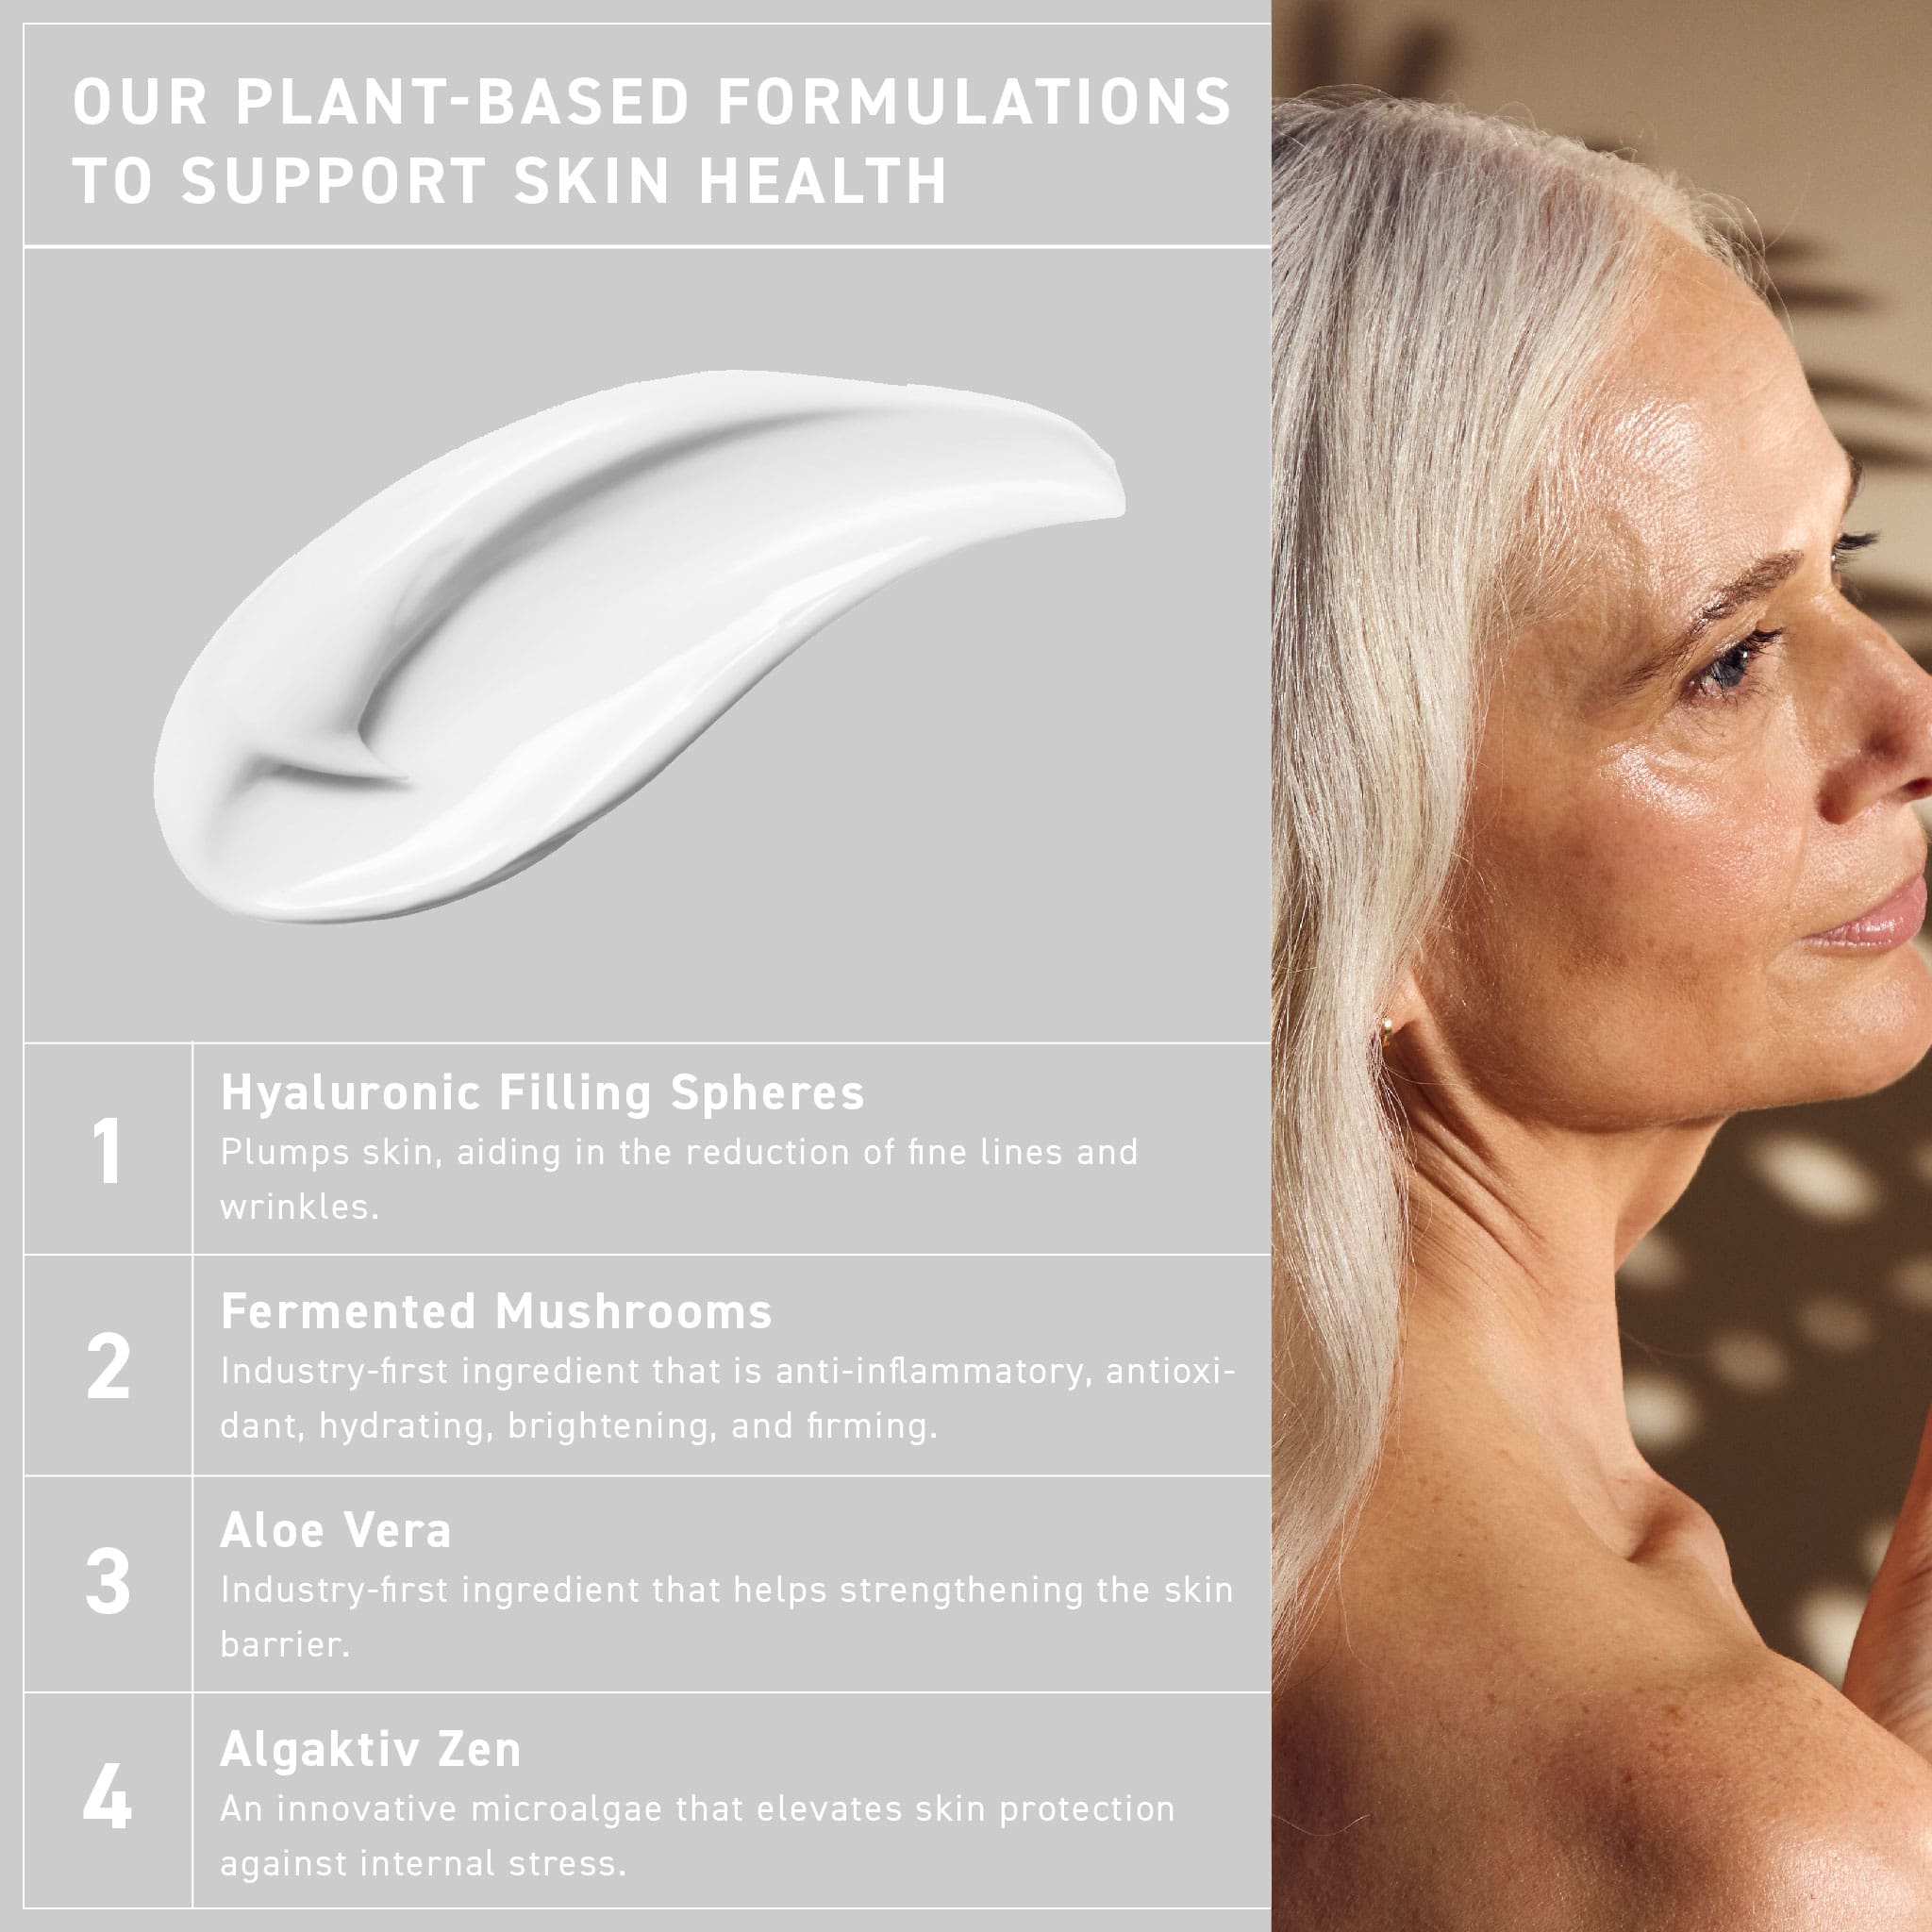 A graph displaying the benefits of each key ingredient in Self Glow by James Read Dusk to Dawn Overnight Tan Facial, including Hyaluronic filling spheres, Fermented mushrooms, Aloe vera, and Algaktiv Zen, working together for optimal skin health.